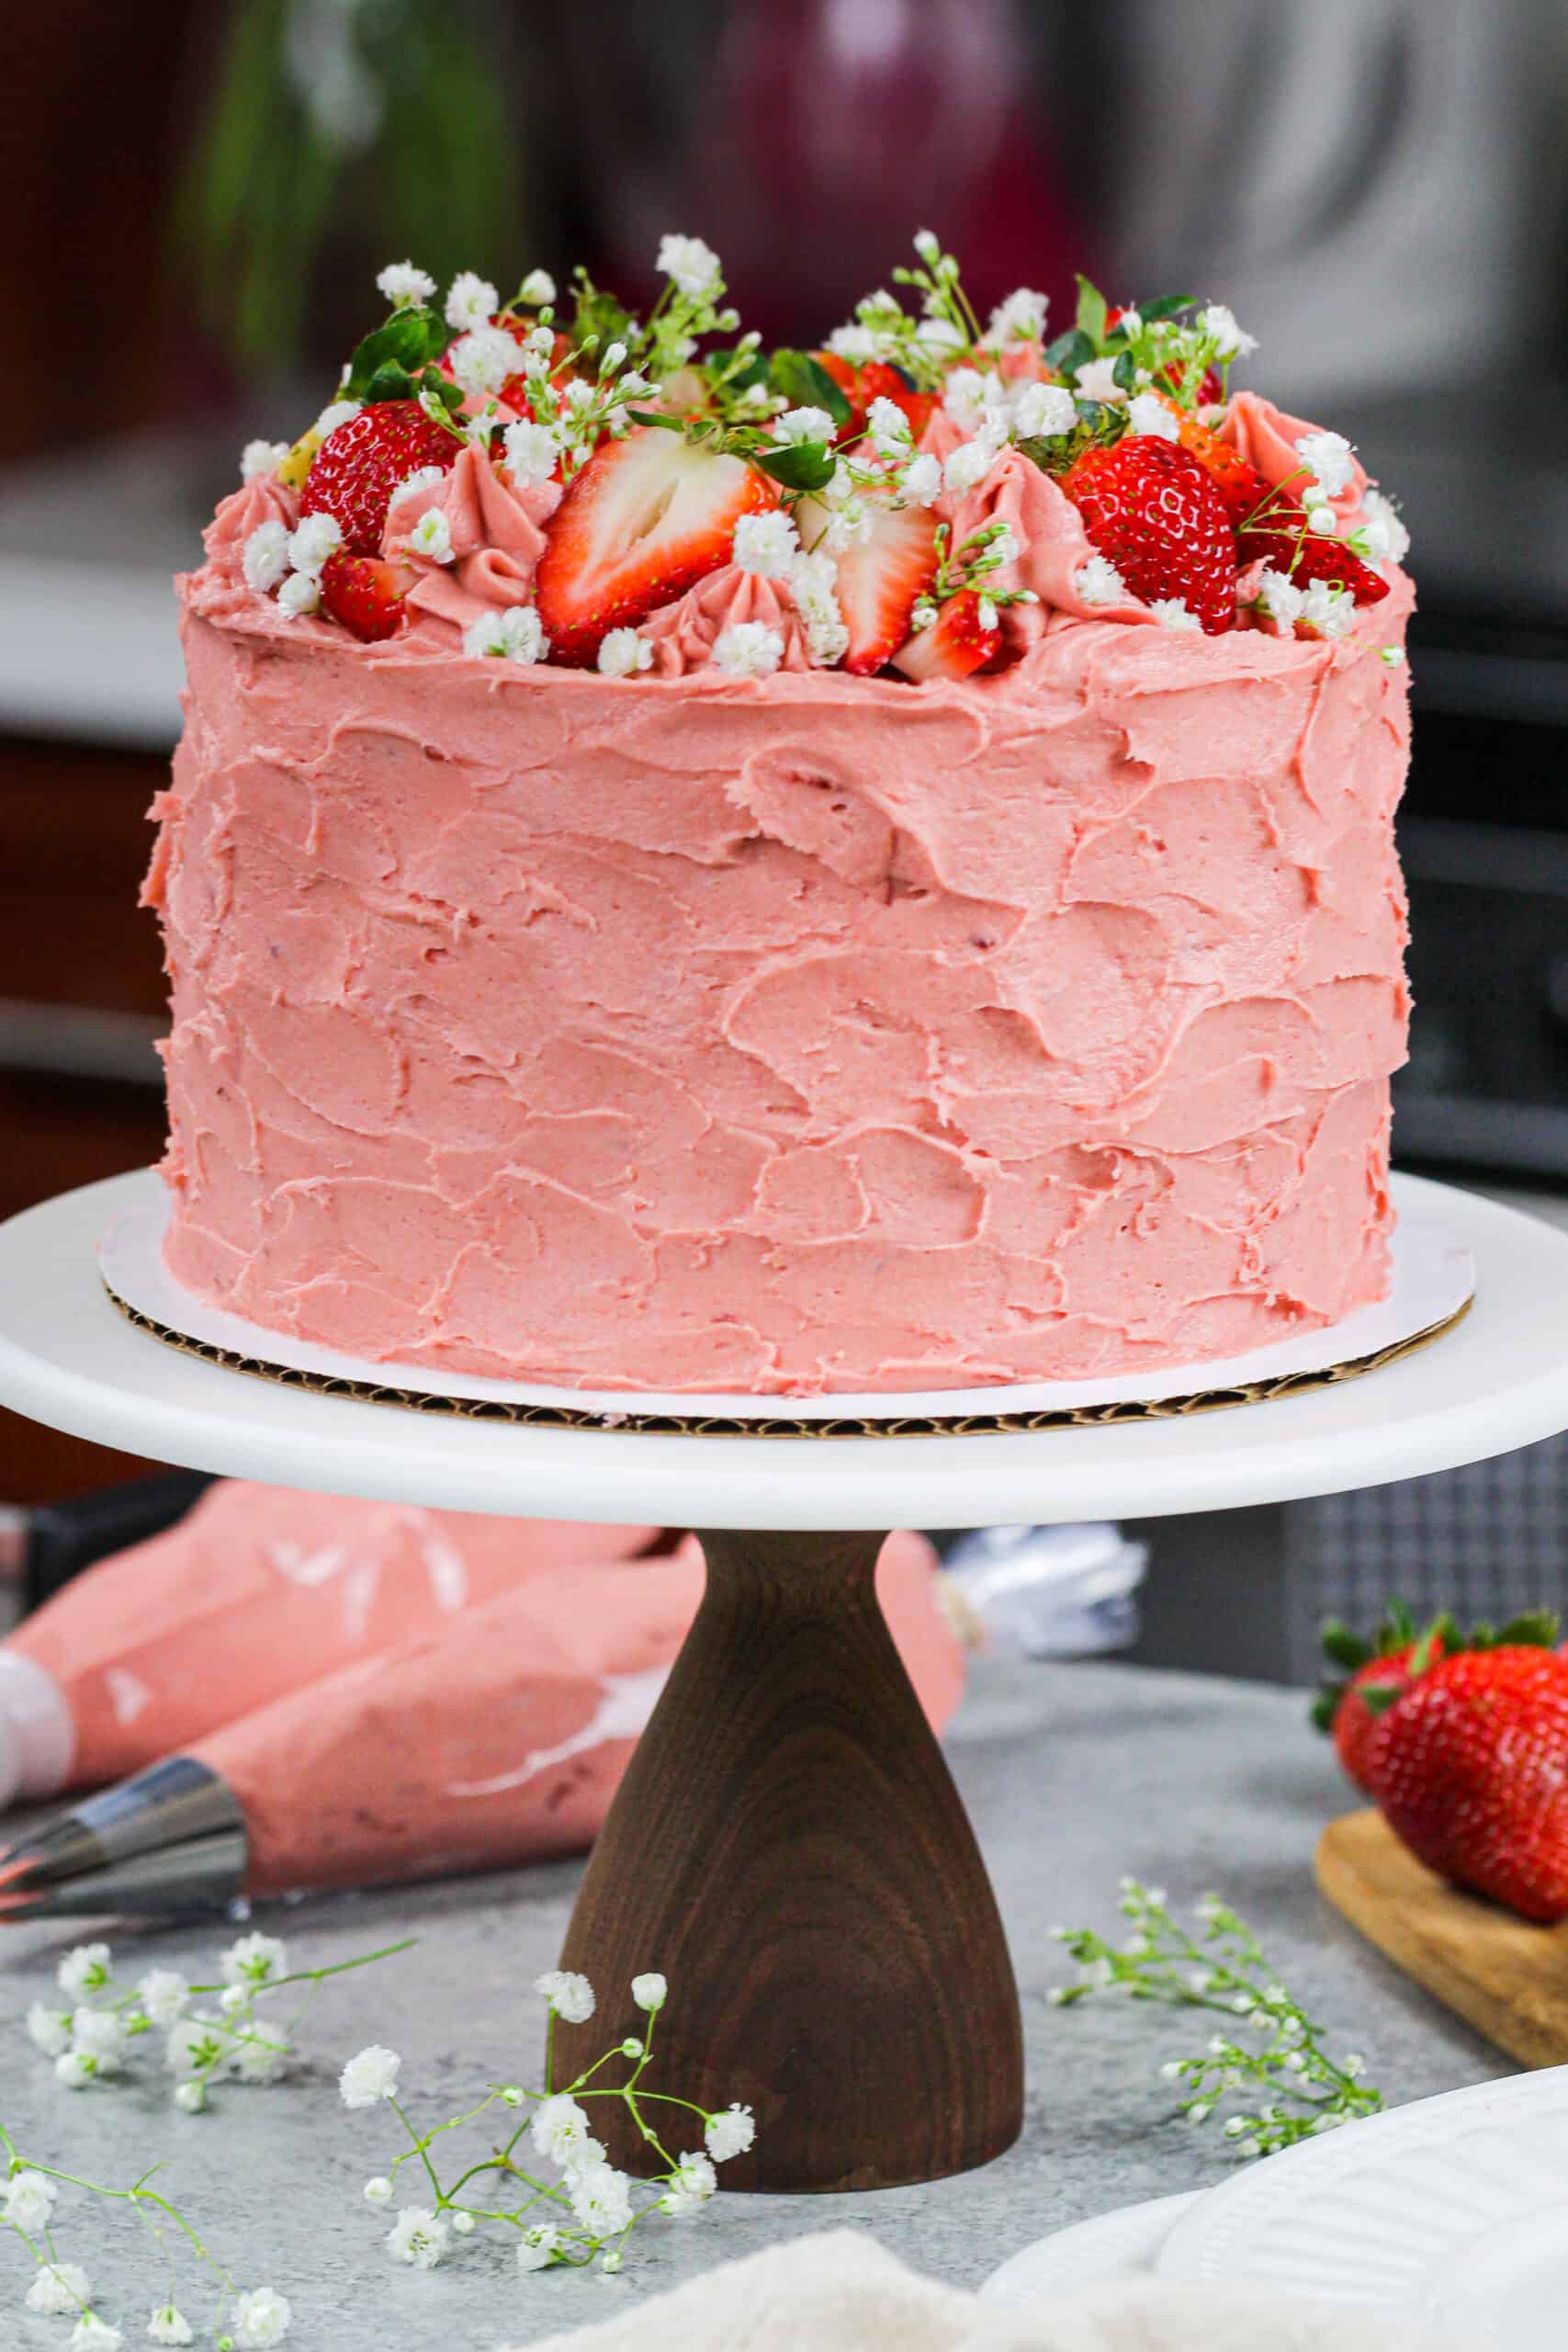 Vanilla Cake with Strawberry Filling Recipe - The Cookie Rookie®